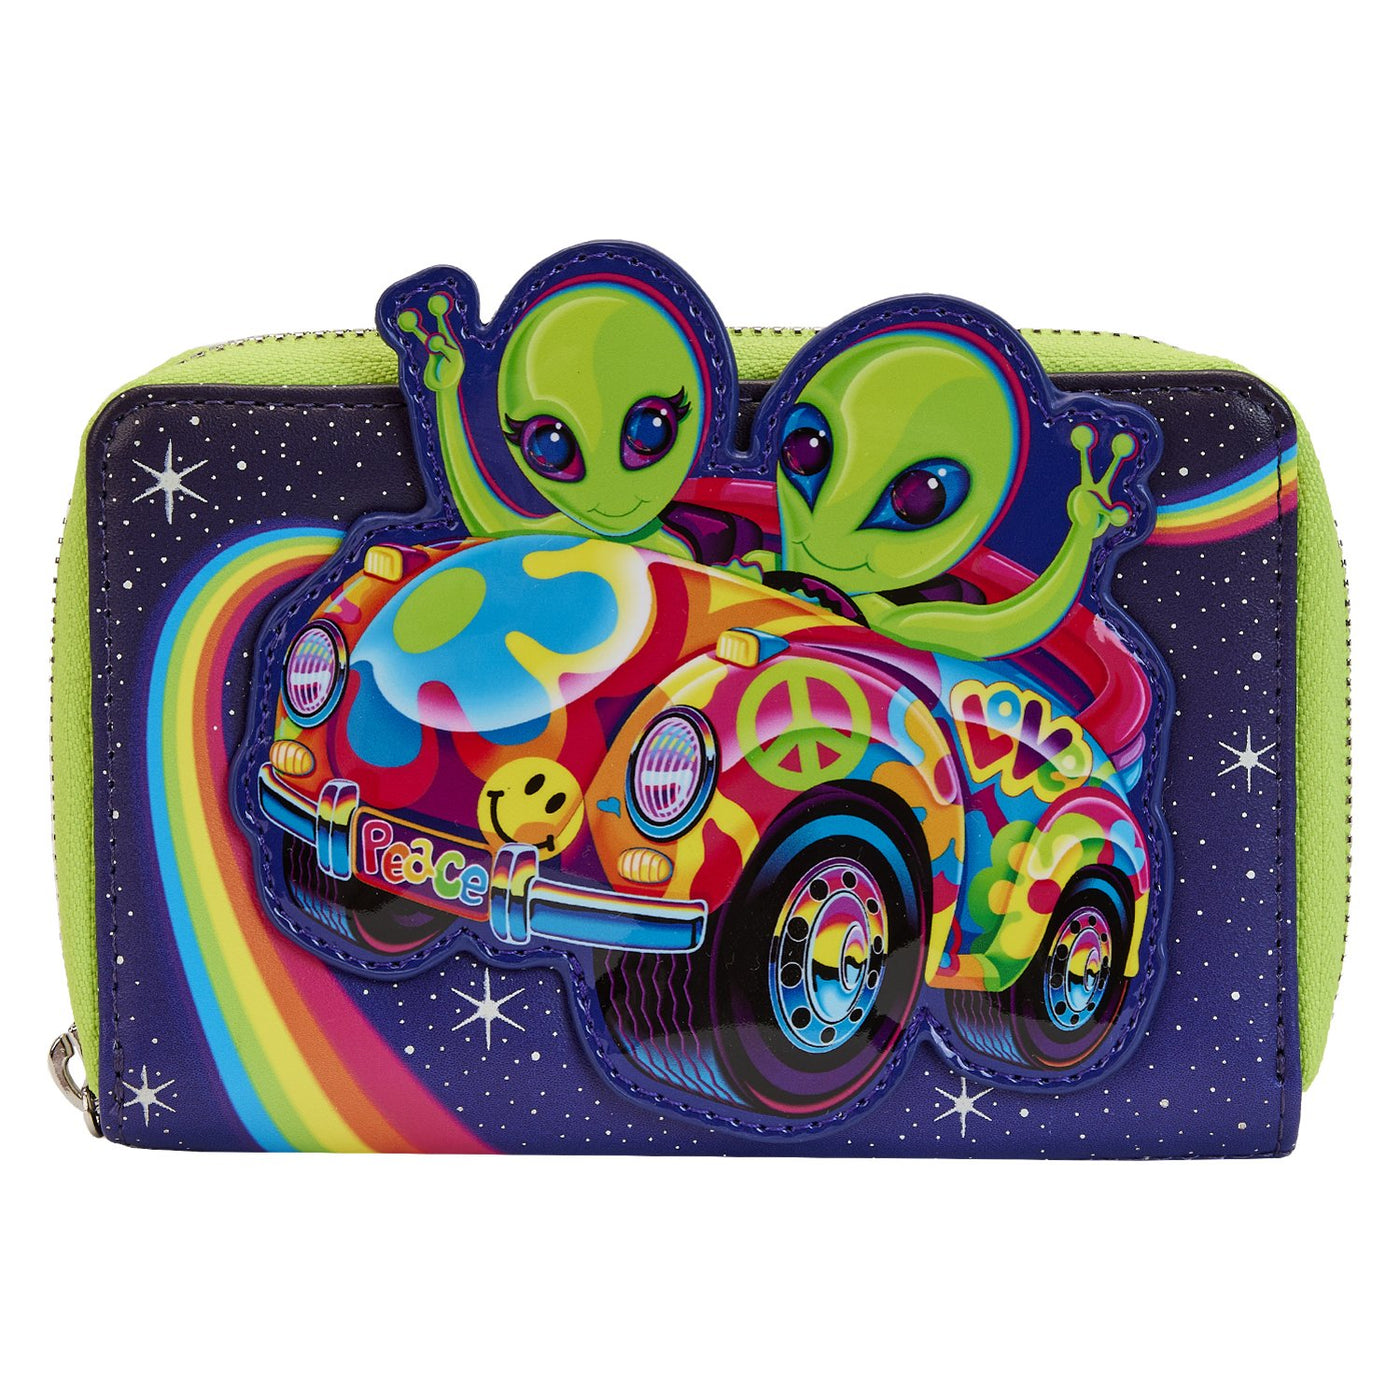  Loungefly Lisa Frank Iridescent Flap Wallet : Clothing